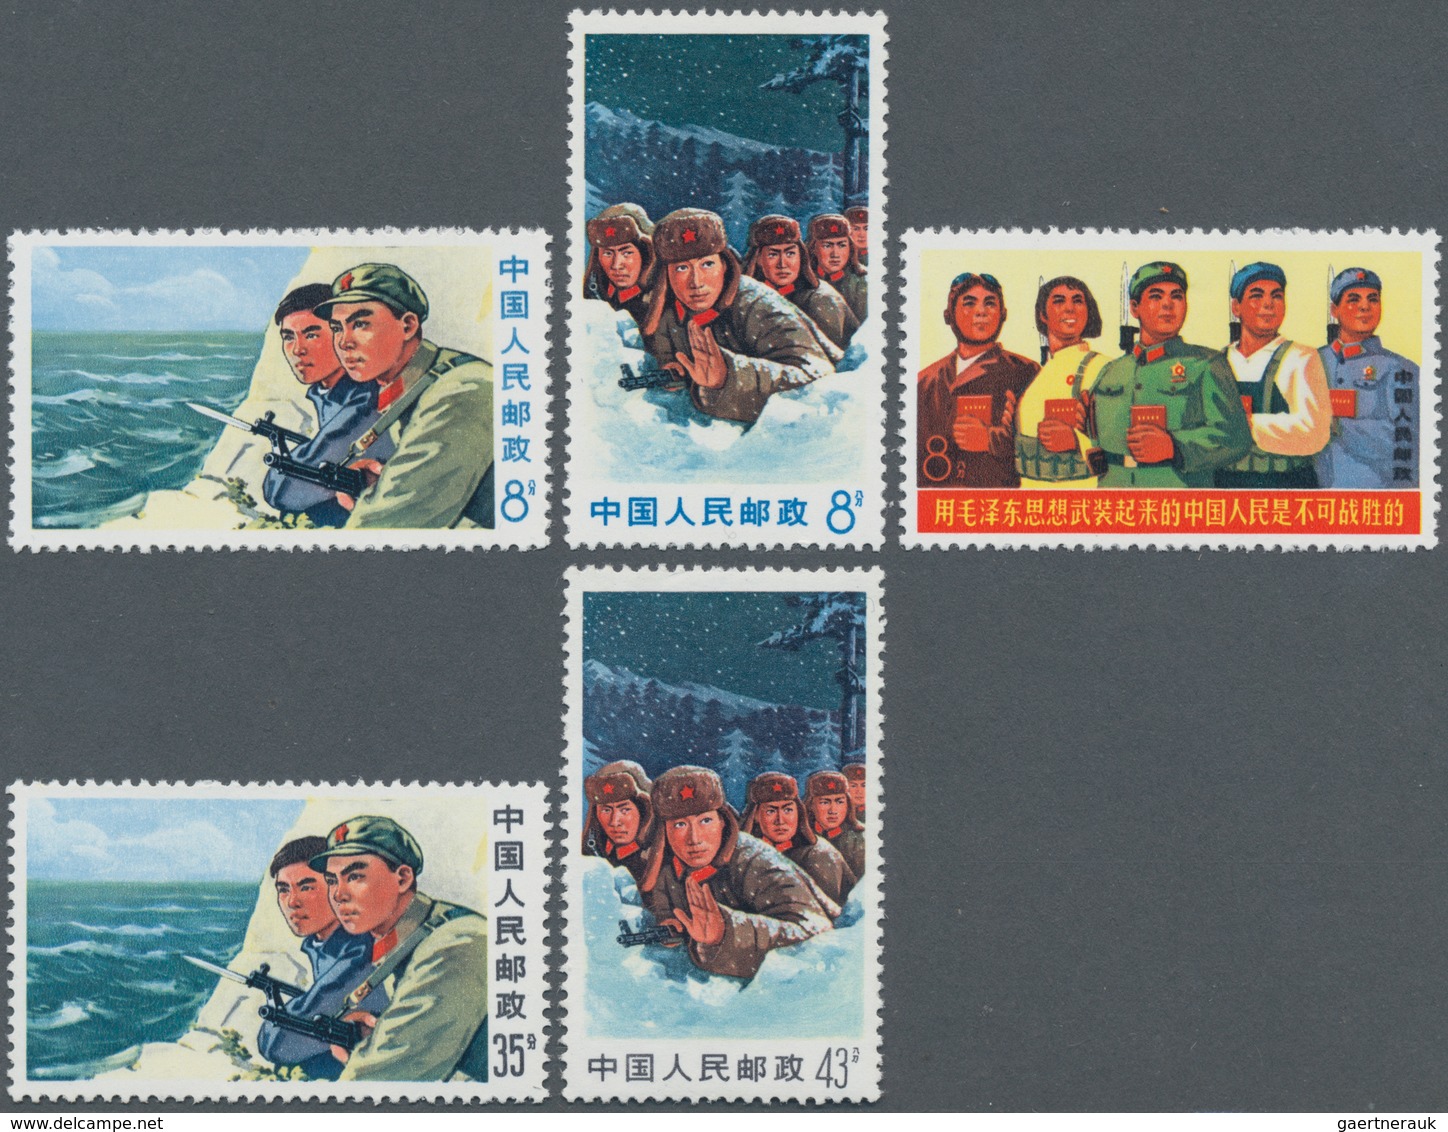 China - Volksrepublik: 1968/1971, five issues MNH: Communist Party (W15), Piano Music (W16), Chinese